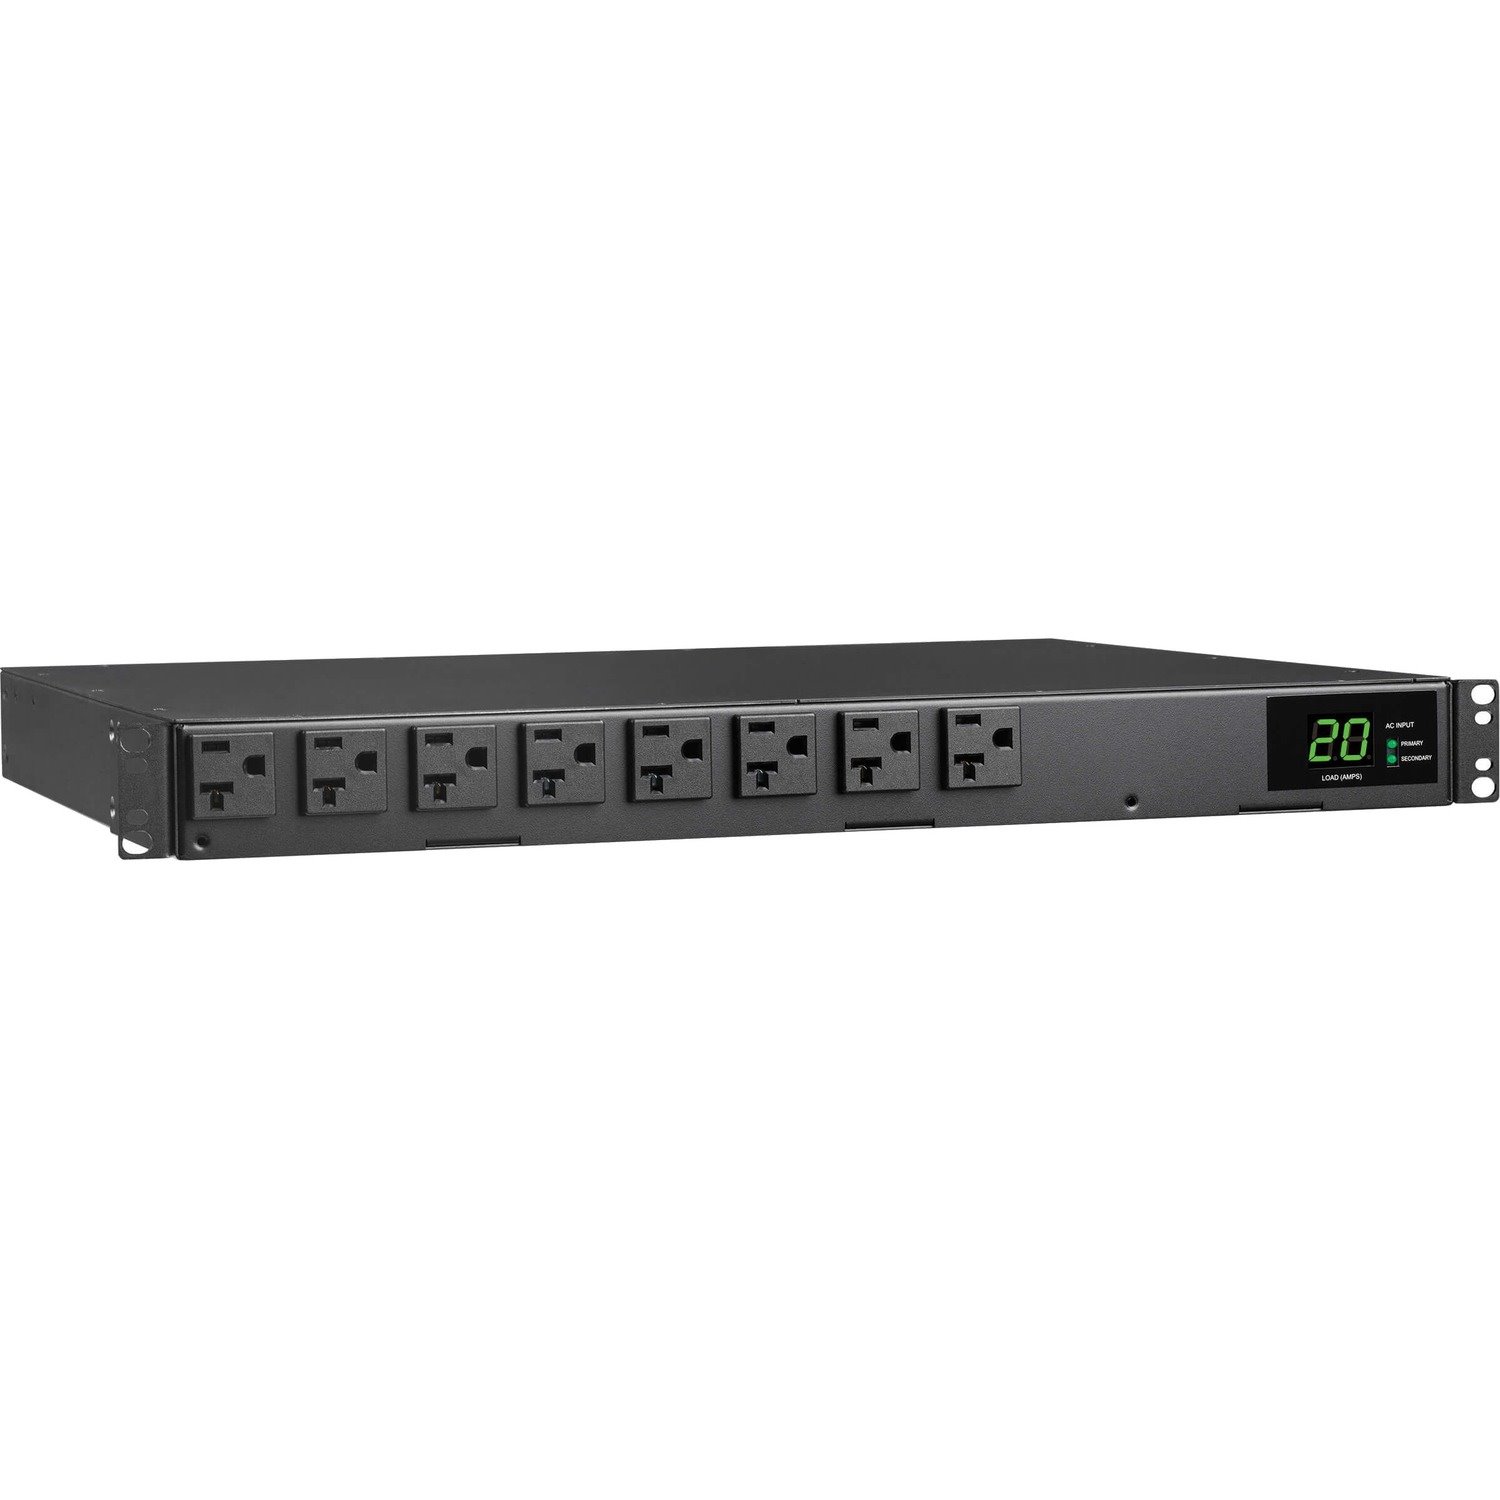 Tripp Lite by Eaton 1.92kW 120V Single-Phase ATS/Local Metered PDU - 16 5-15/20R Outlets, Dual L5-20P/5-20P Inputs, 12 ft. Cords, 1U, TAA